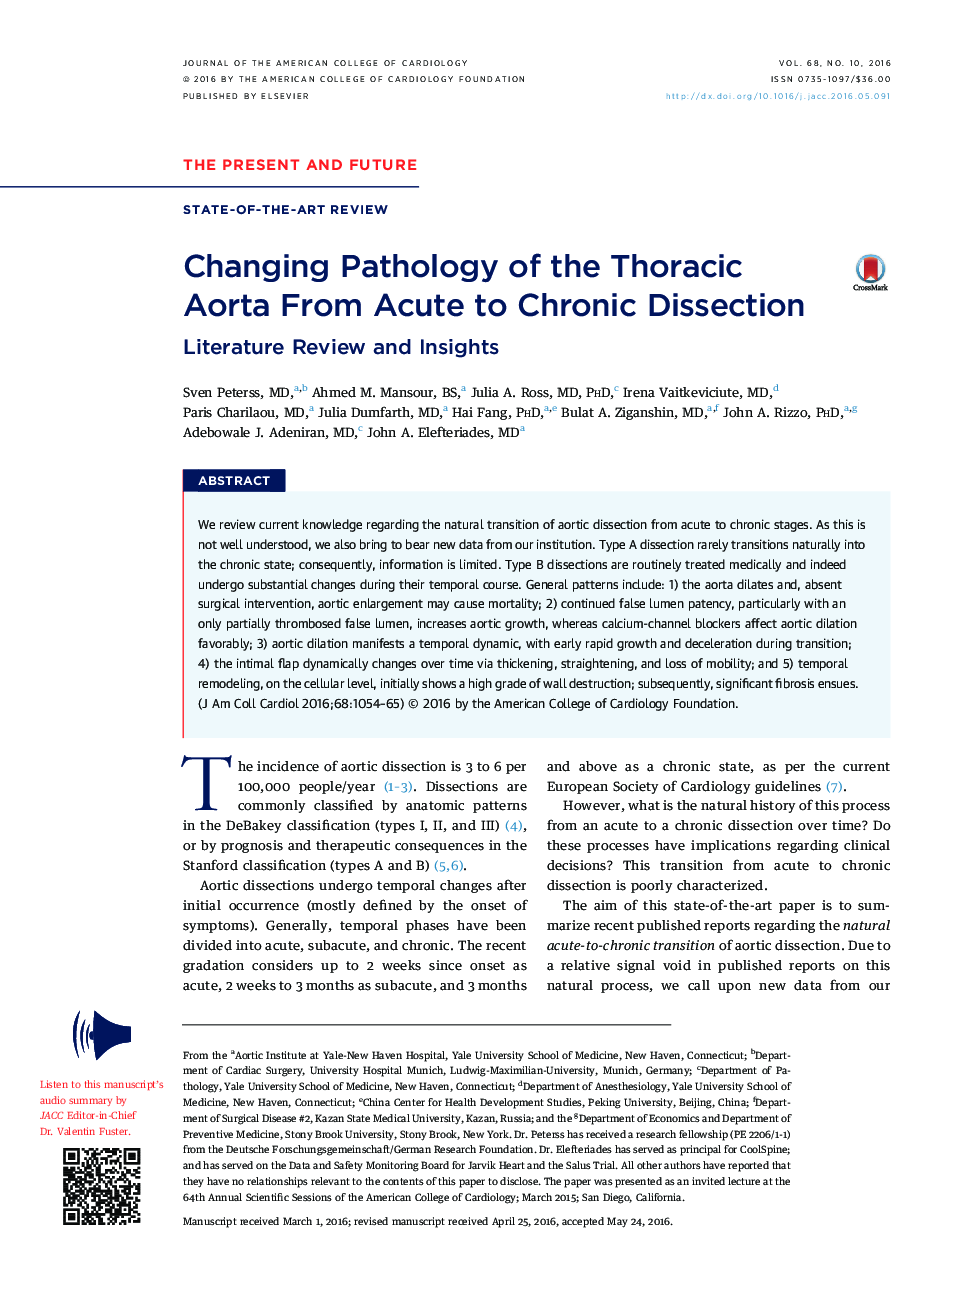 Changing Pathology of the Thoracic AortaÂ From Acute to Chronic Dissection: Literature Review and Insights